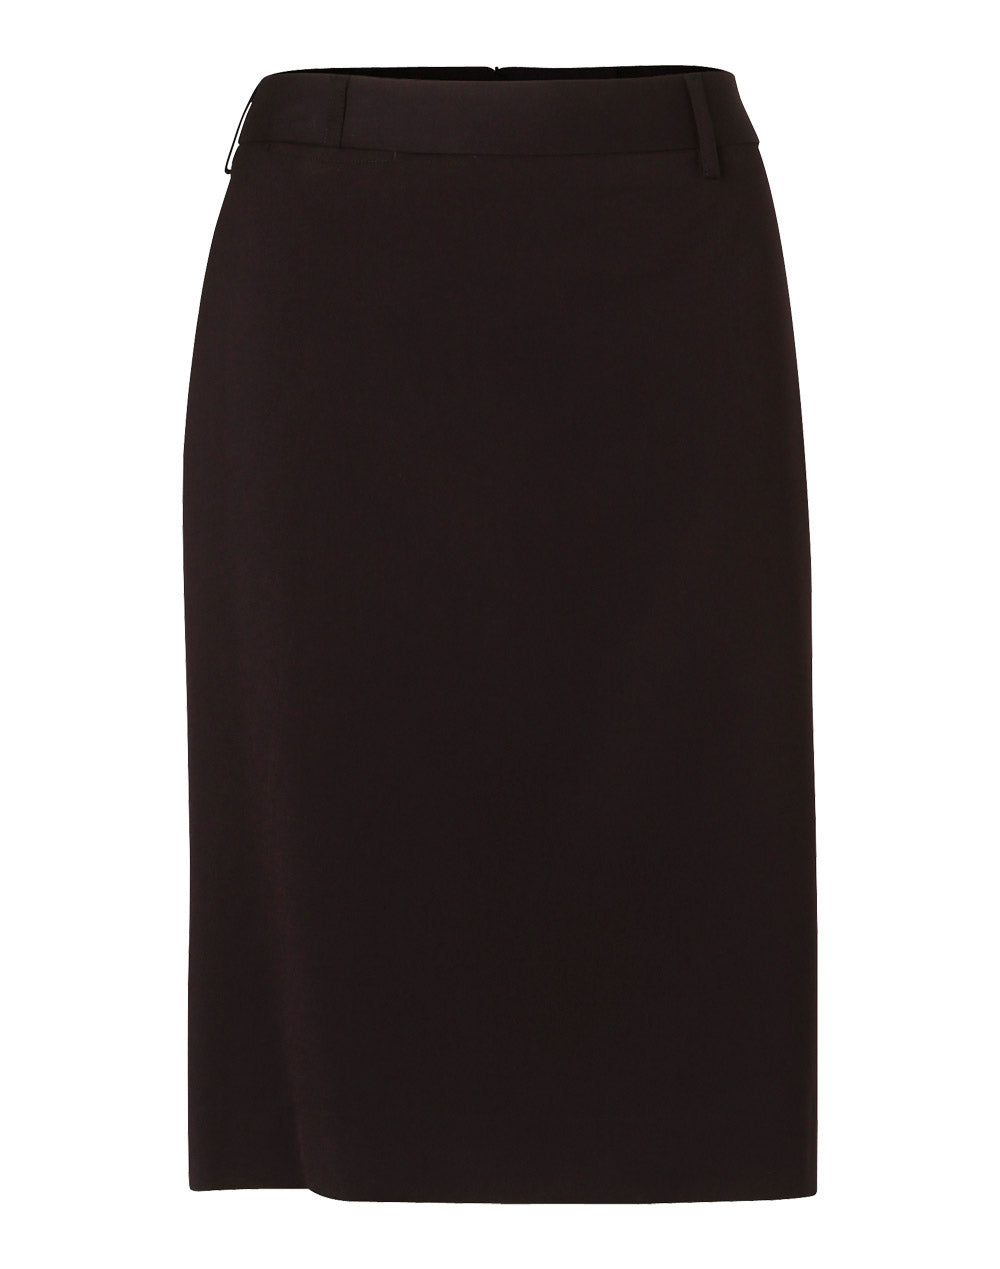 M9471 Women's Poly/Viscose Stretch Mid Length Lined Pencil Skirt